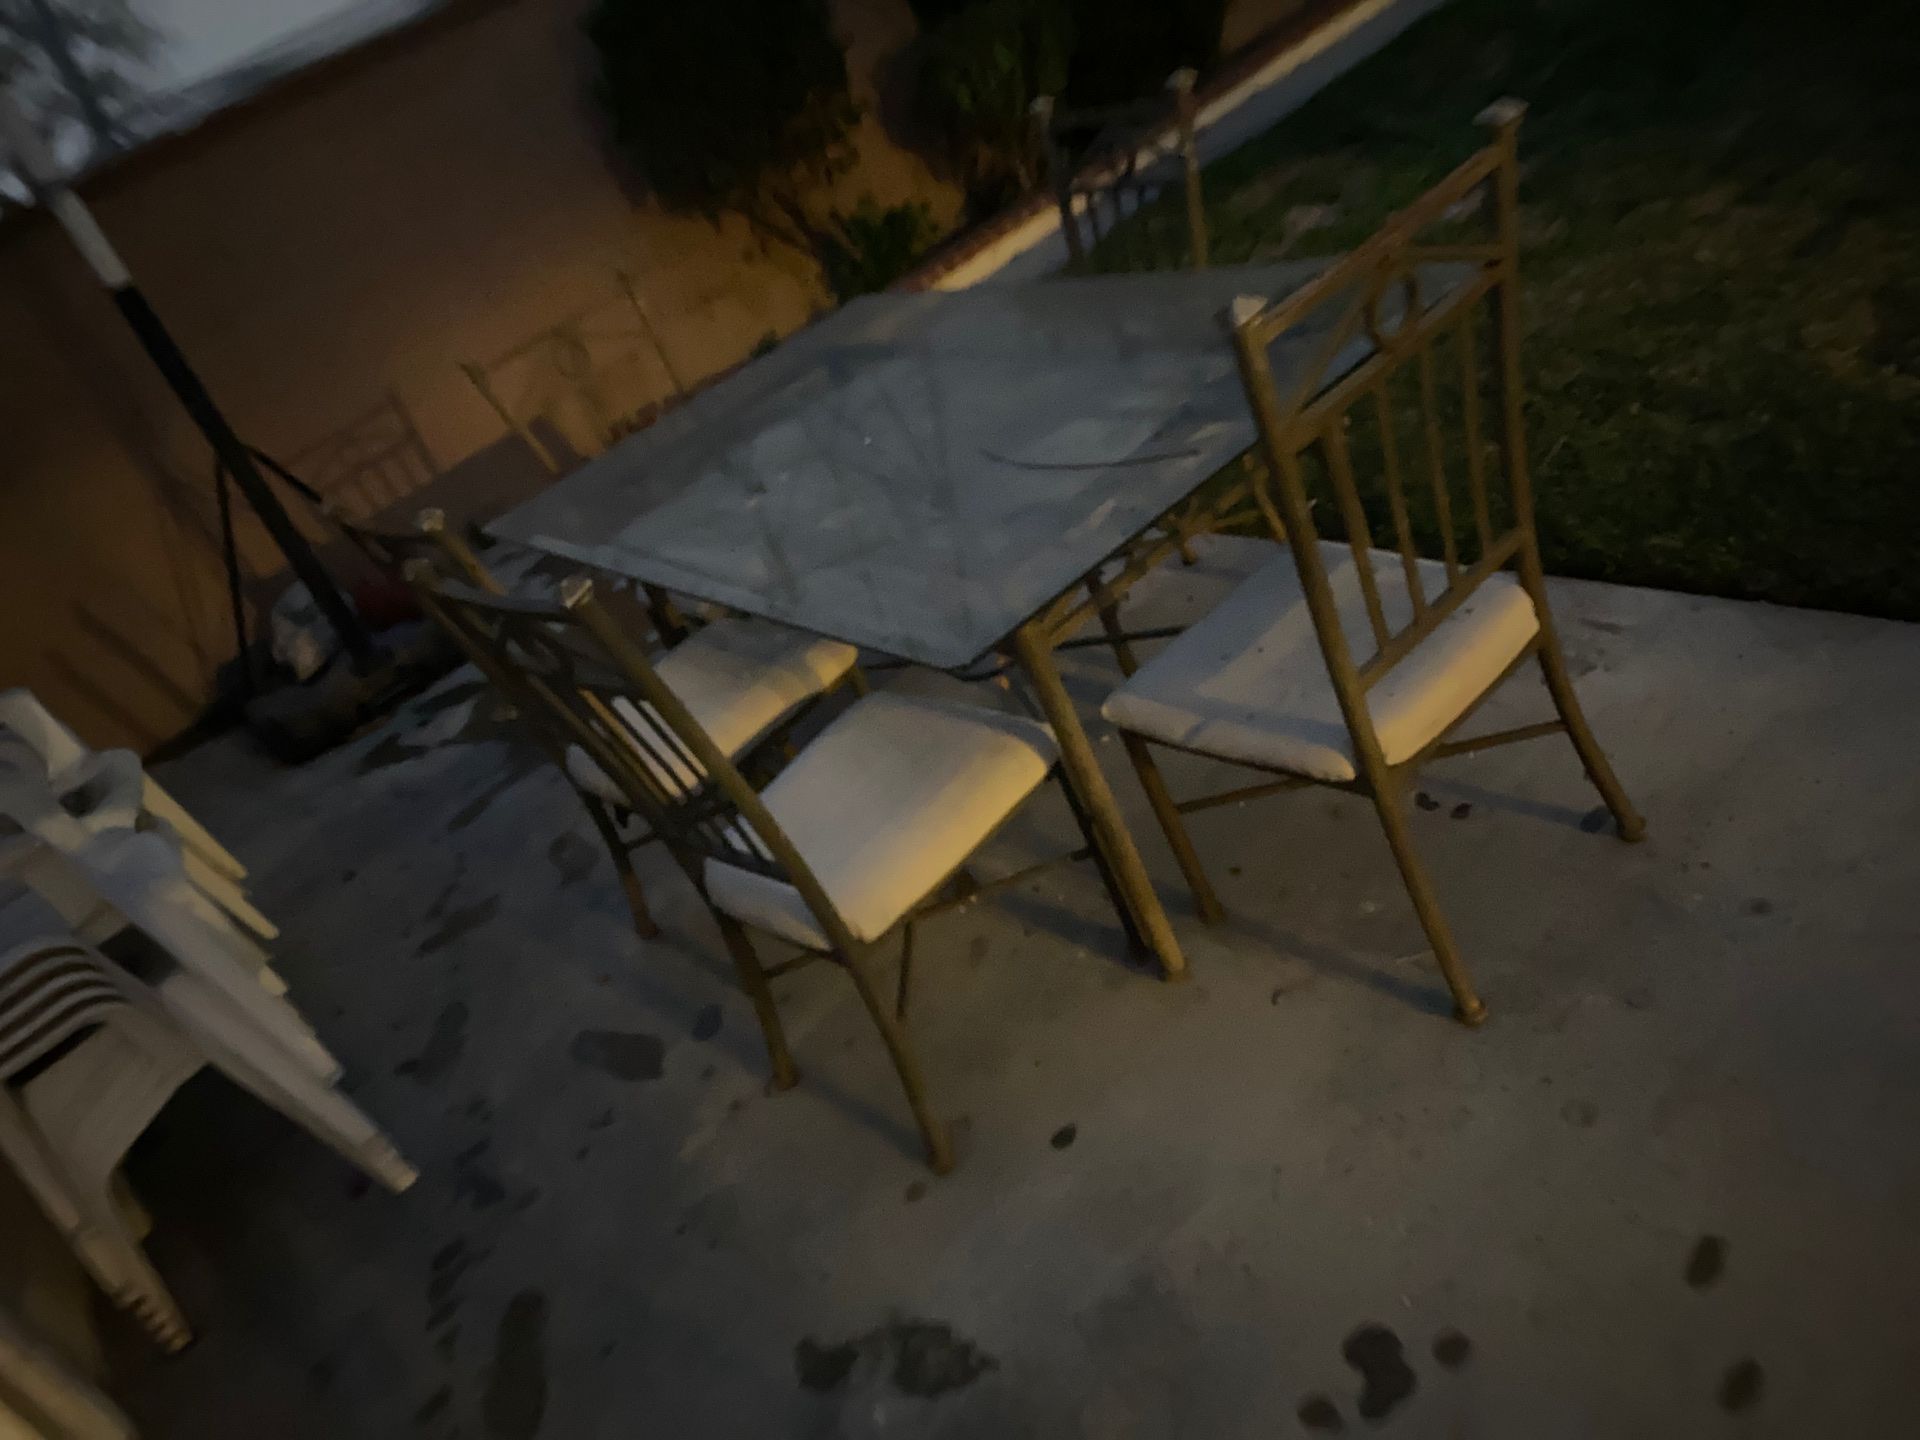 Free table and 5 chairs been outside need cleaning